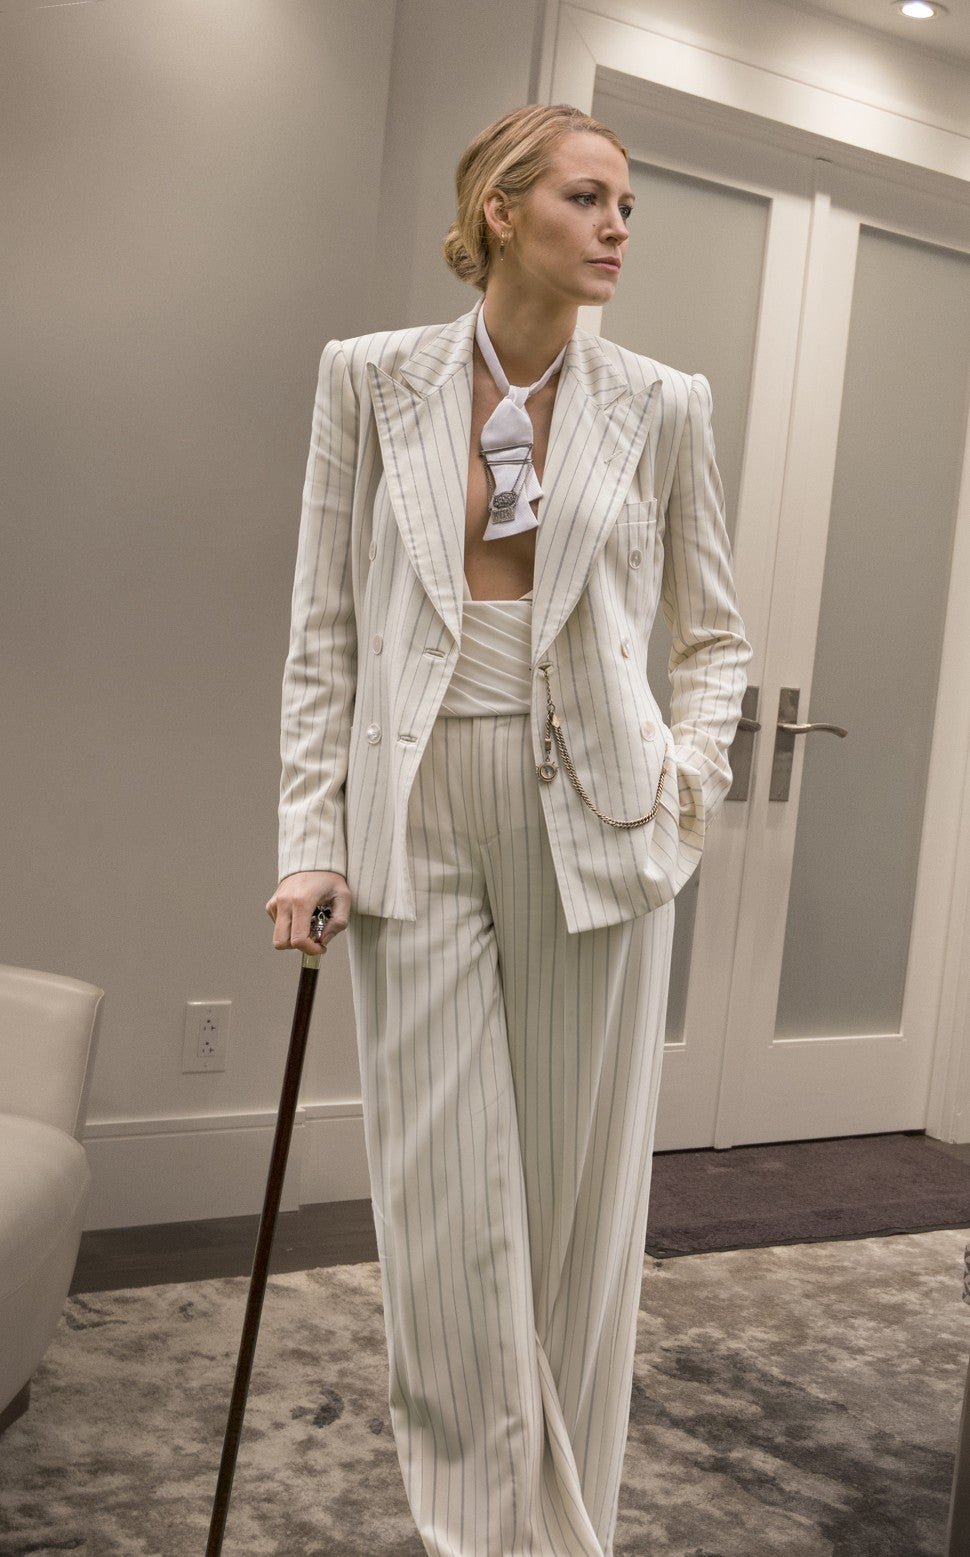 Blake Lively white Ralph Lauren suit in A Simple Favor